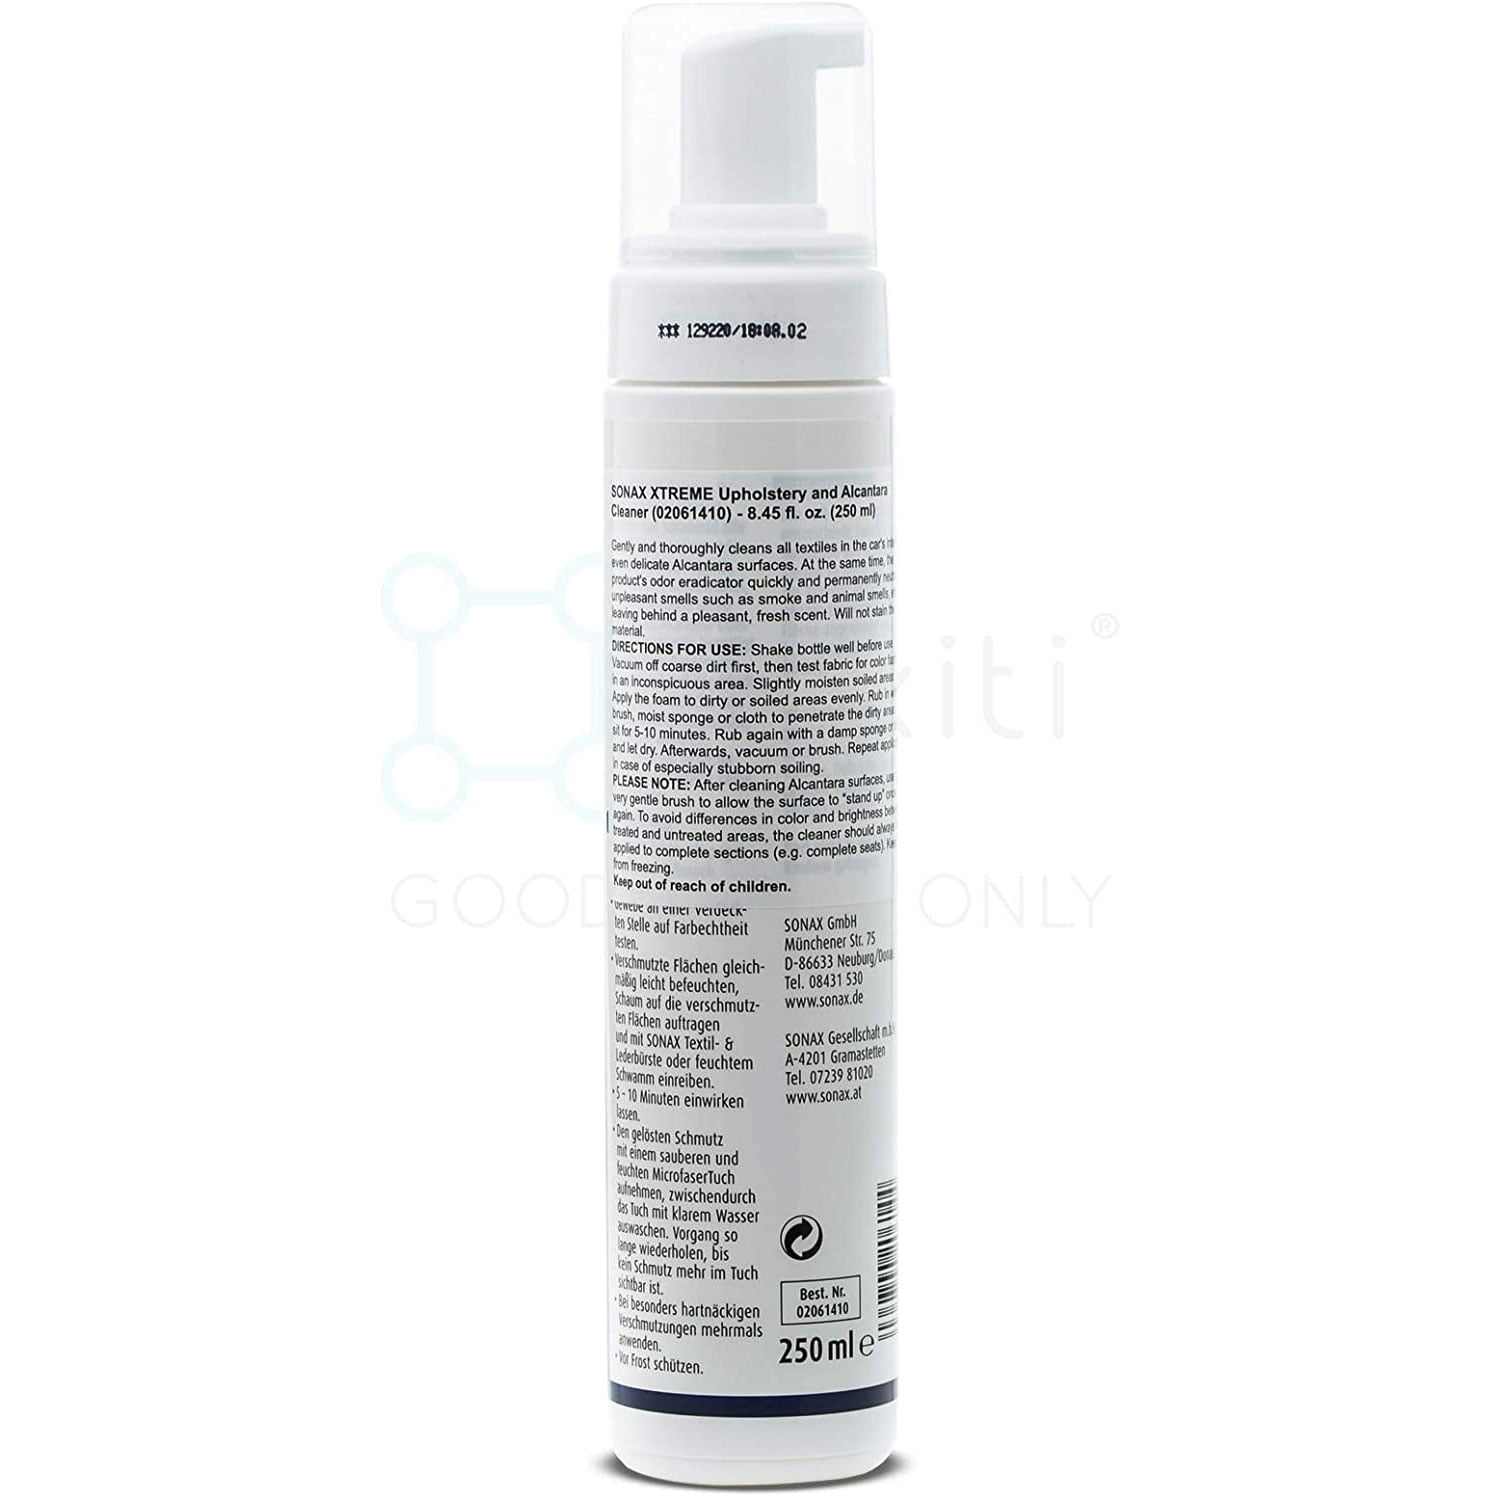 Sonax XTREME Upholstery + Alcantara® Cleaner without propellant 250ml